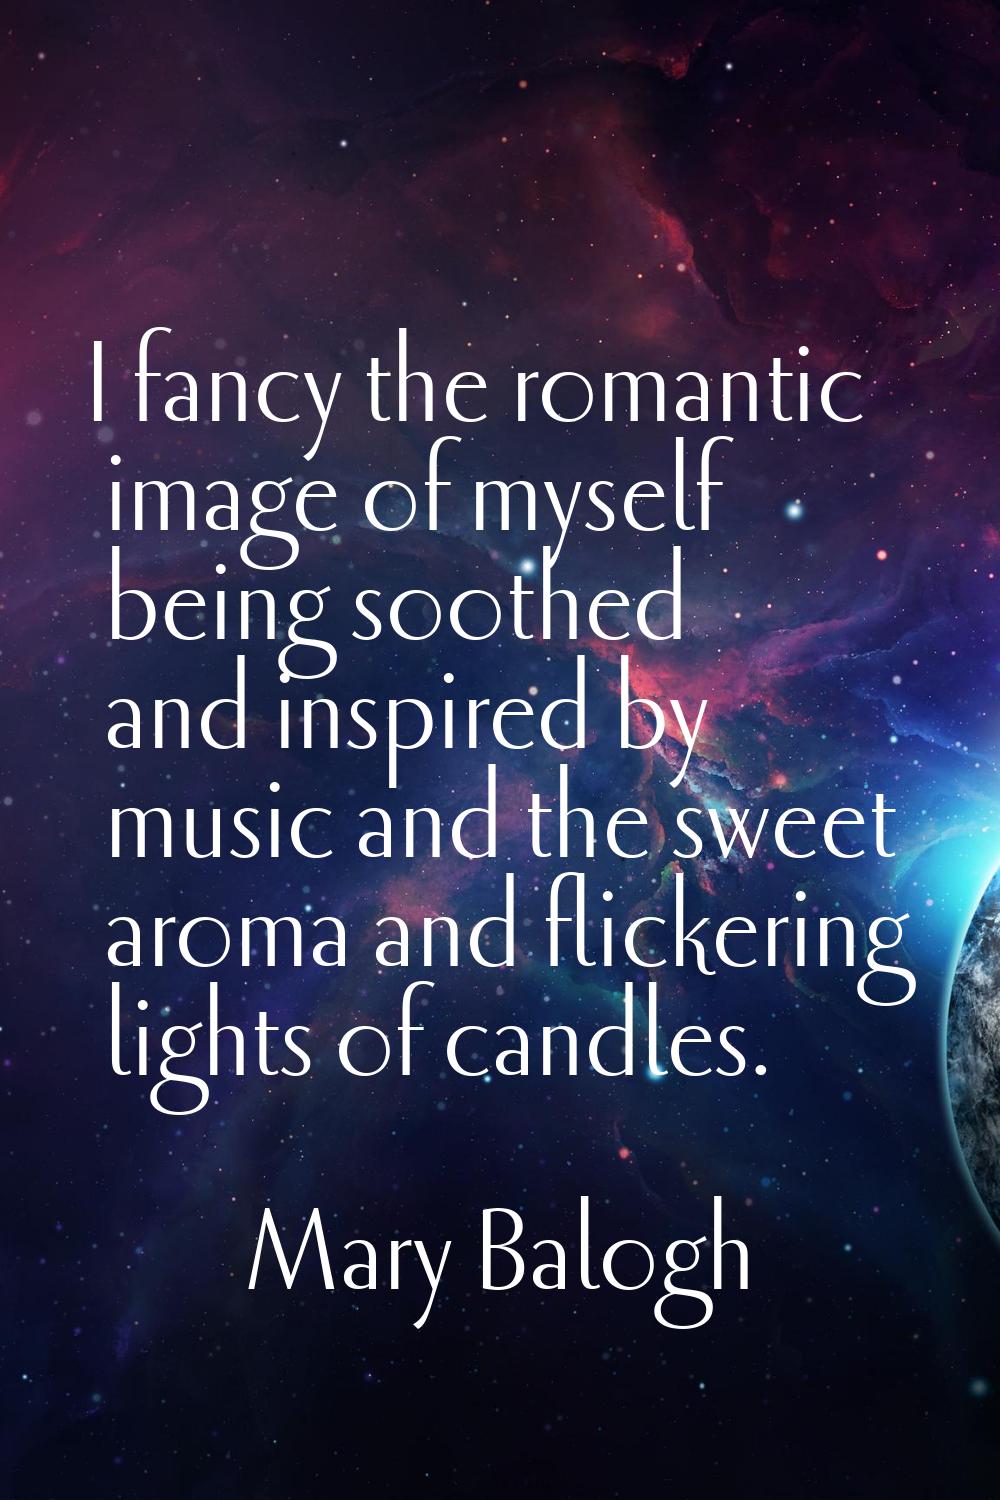 I fancy the romantic image of myself being soothed and inspired by music and the sweet aroma and fl